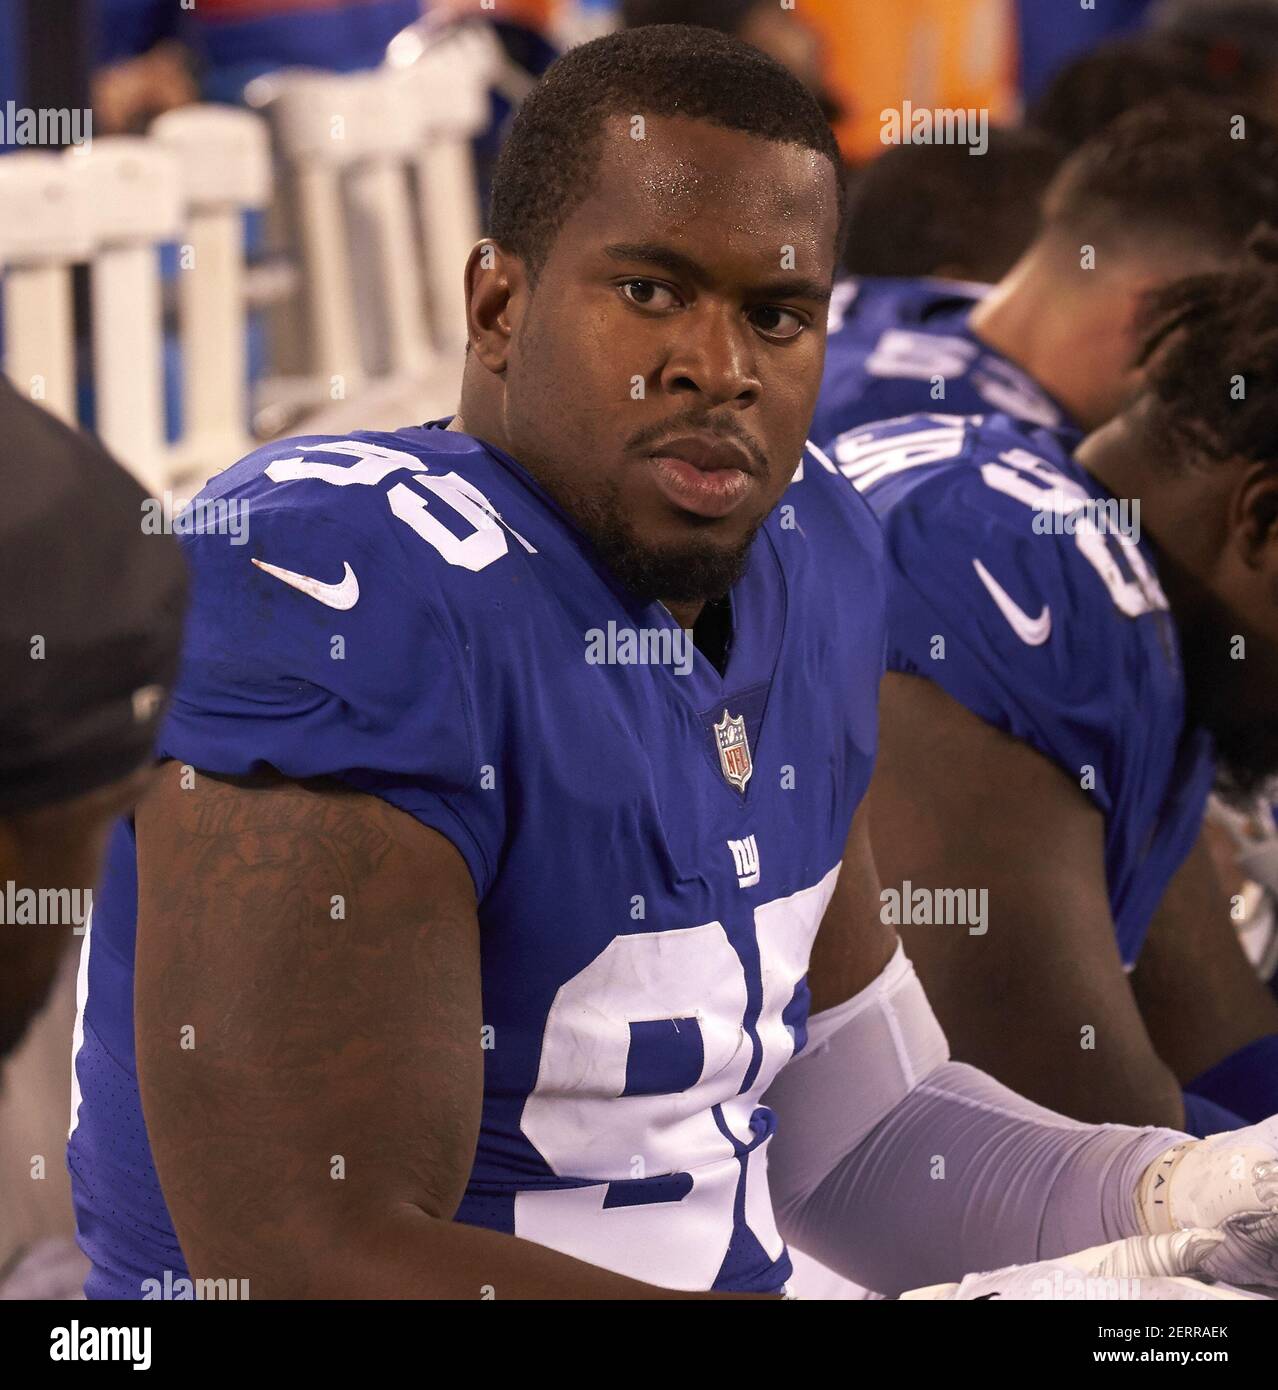 October 2, 2018 - East Rutherford, New Jersey, U.S. - New York Giants  defensive tackle B.J. Hill (95) on the sideline during a NFL game between  the New Orlean Saints and the